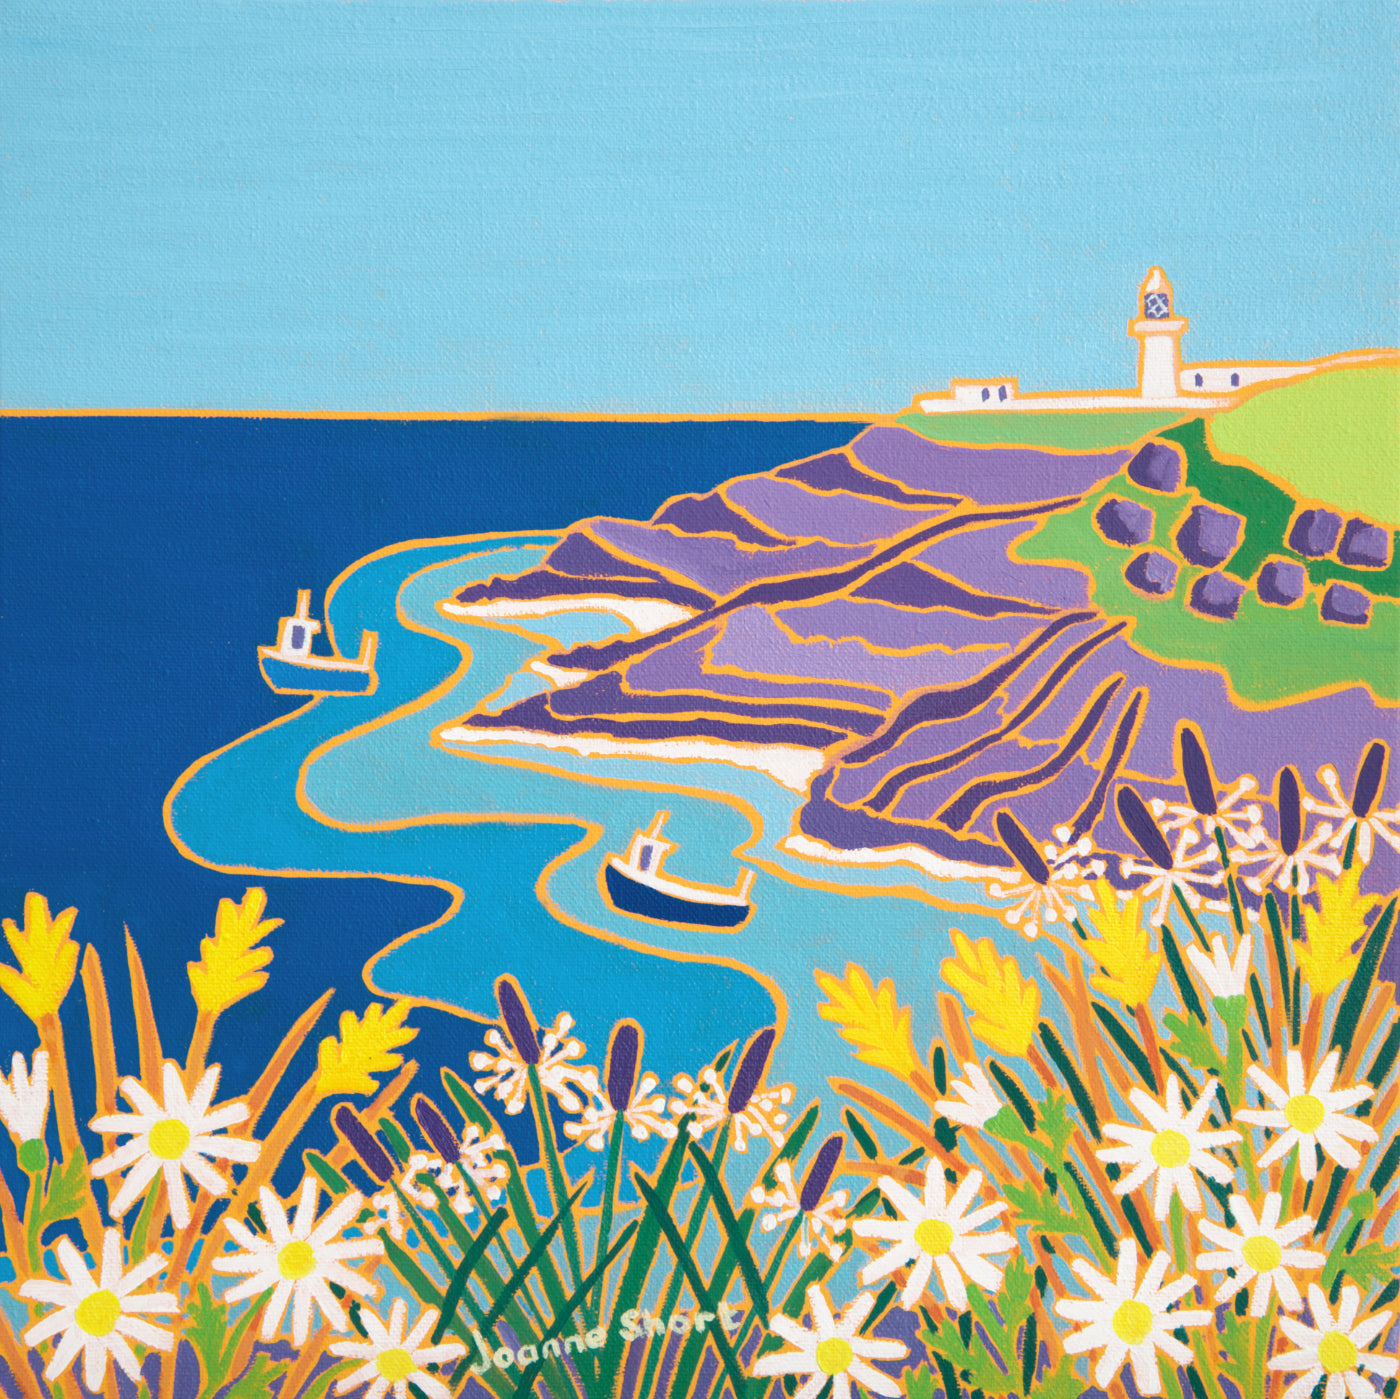 The wonderful sight of the wild Cornish flowers on the cliffs, set against the sea and the view towards Pendeen lighthouse has been captured in this delightful new oil painting by acclaimed Cornish artist Joanne Short. Fishing boats, wild grasses, blue sea and Cornish air all radiate the essence of the Cornish coast from this delightful new painting.